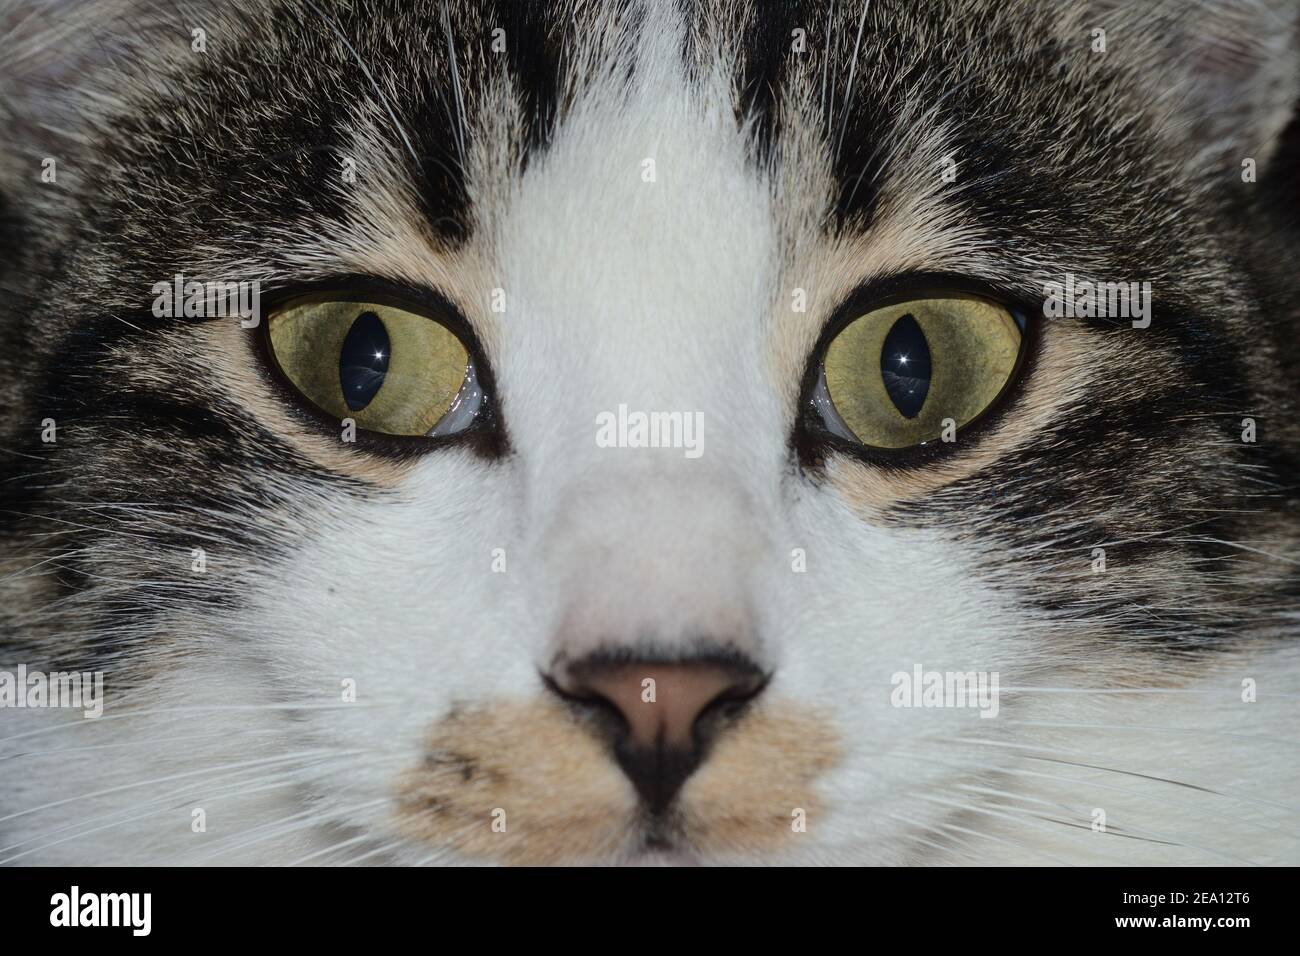 closeup portrait of the yellow eyes of a tabby cat Stock Photo